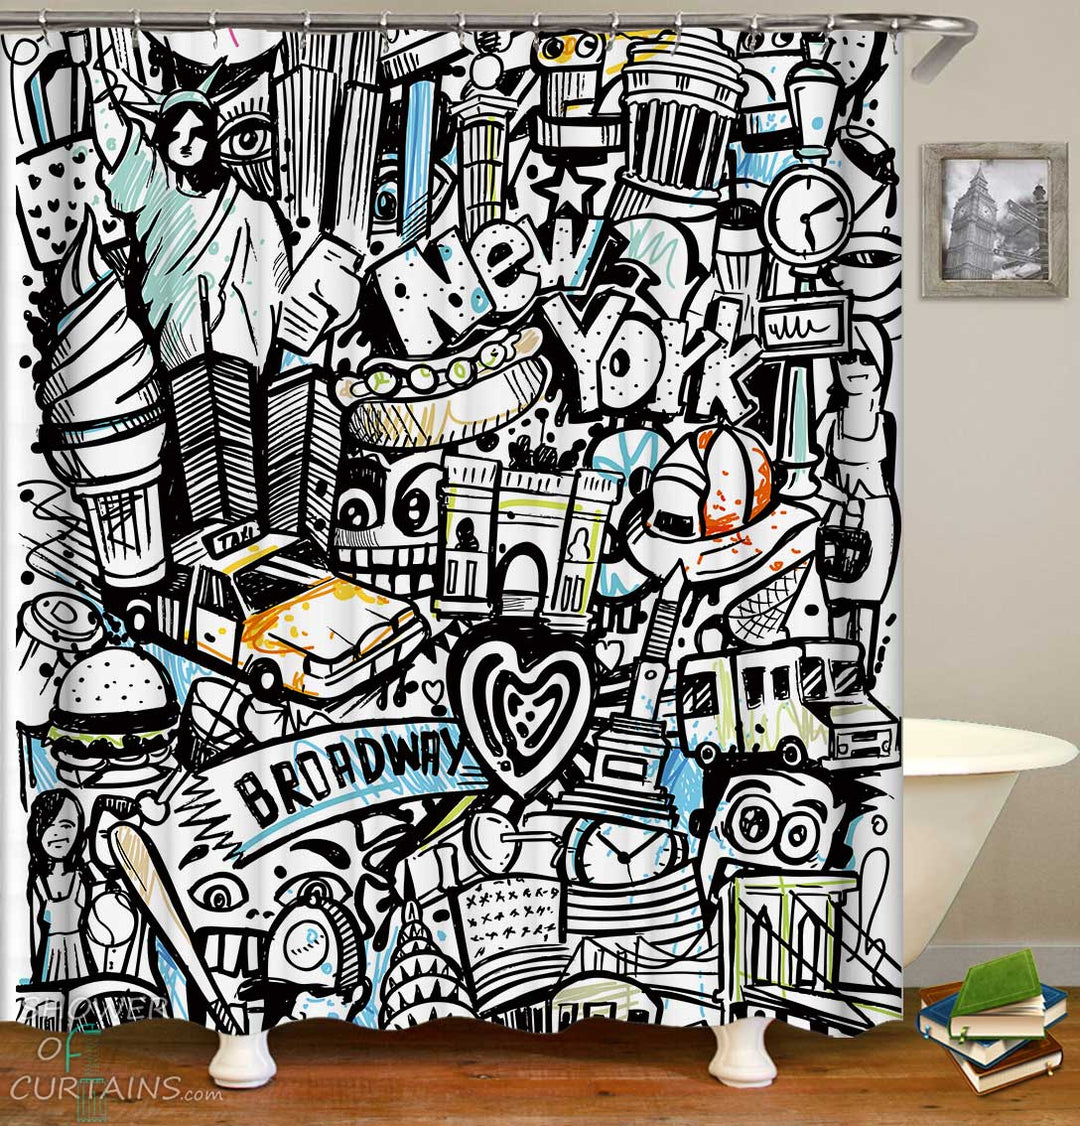 Shower Curtains with Cartoon Drawing New York City